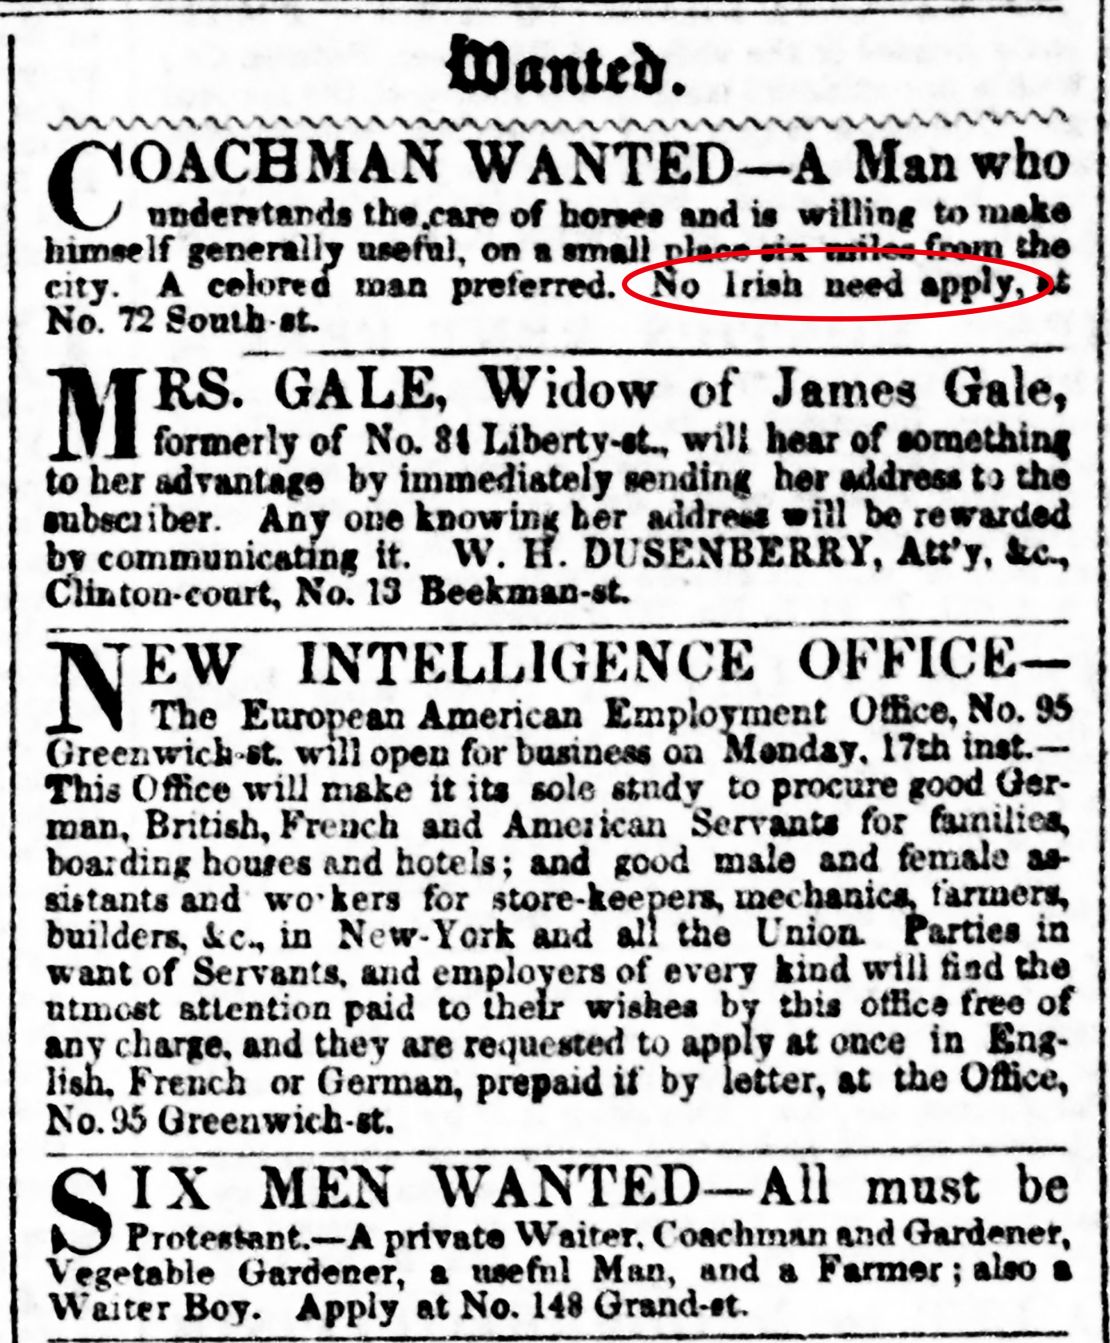 This help-wanted column on the front page of the New York Tribune on May 14, 1852 reflects anti-Irish sentiments of the time. CNN has highlighted a portion of this image, circling wording in an ad that states, "No Irish need apply."